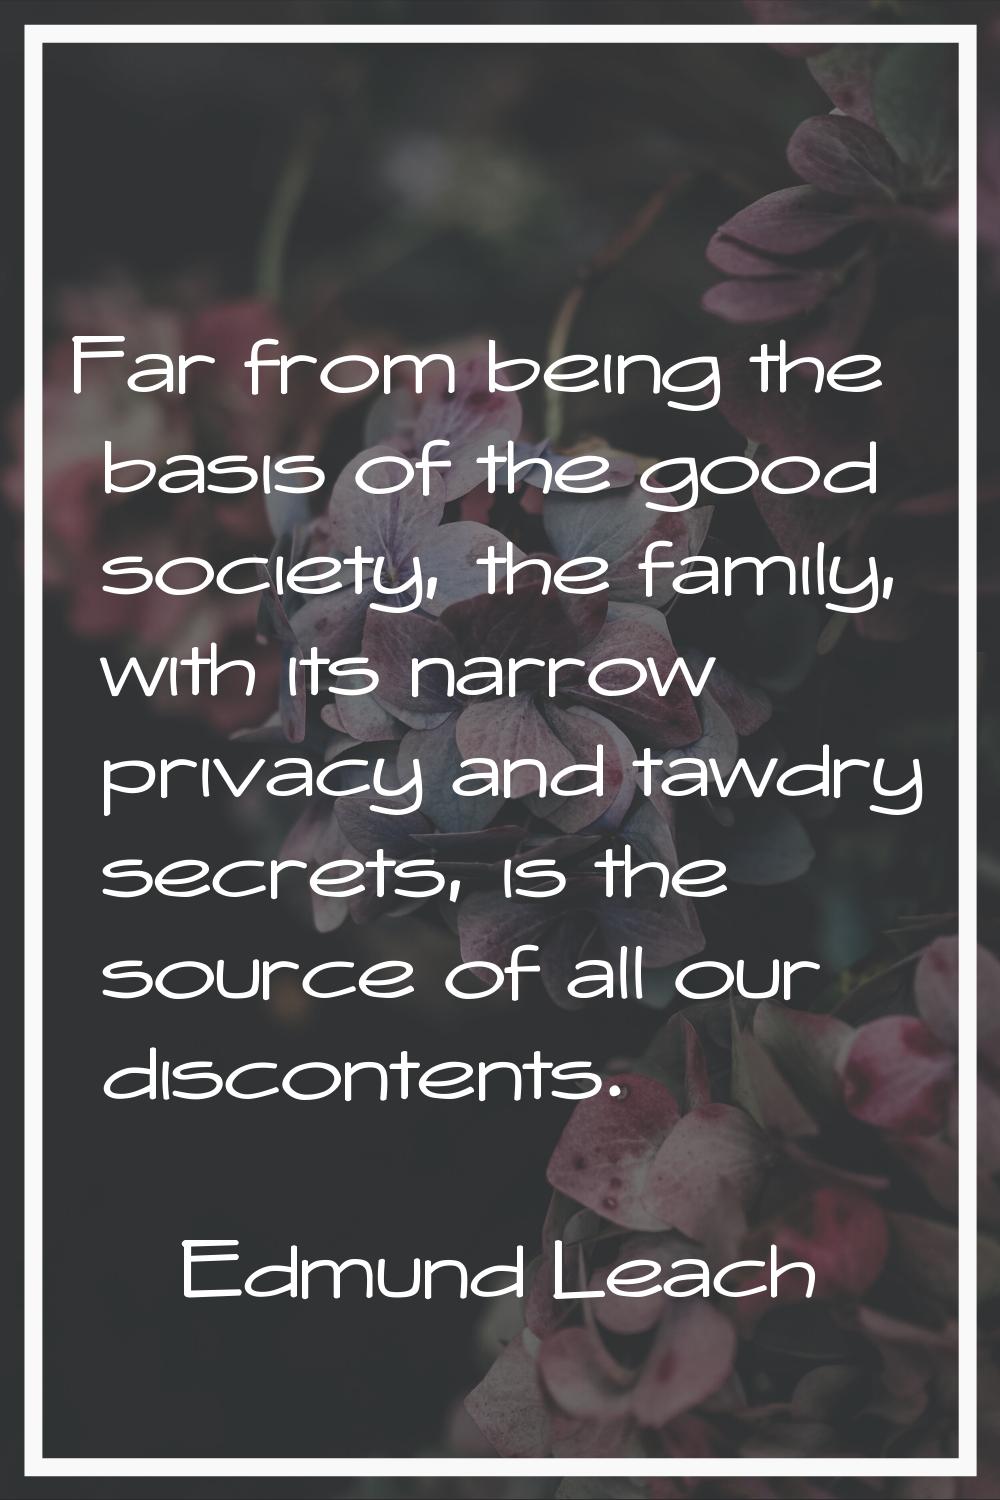 Far from being the basis of the good society, the family, with its narrow privacy and tawdry secret